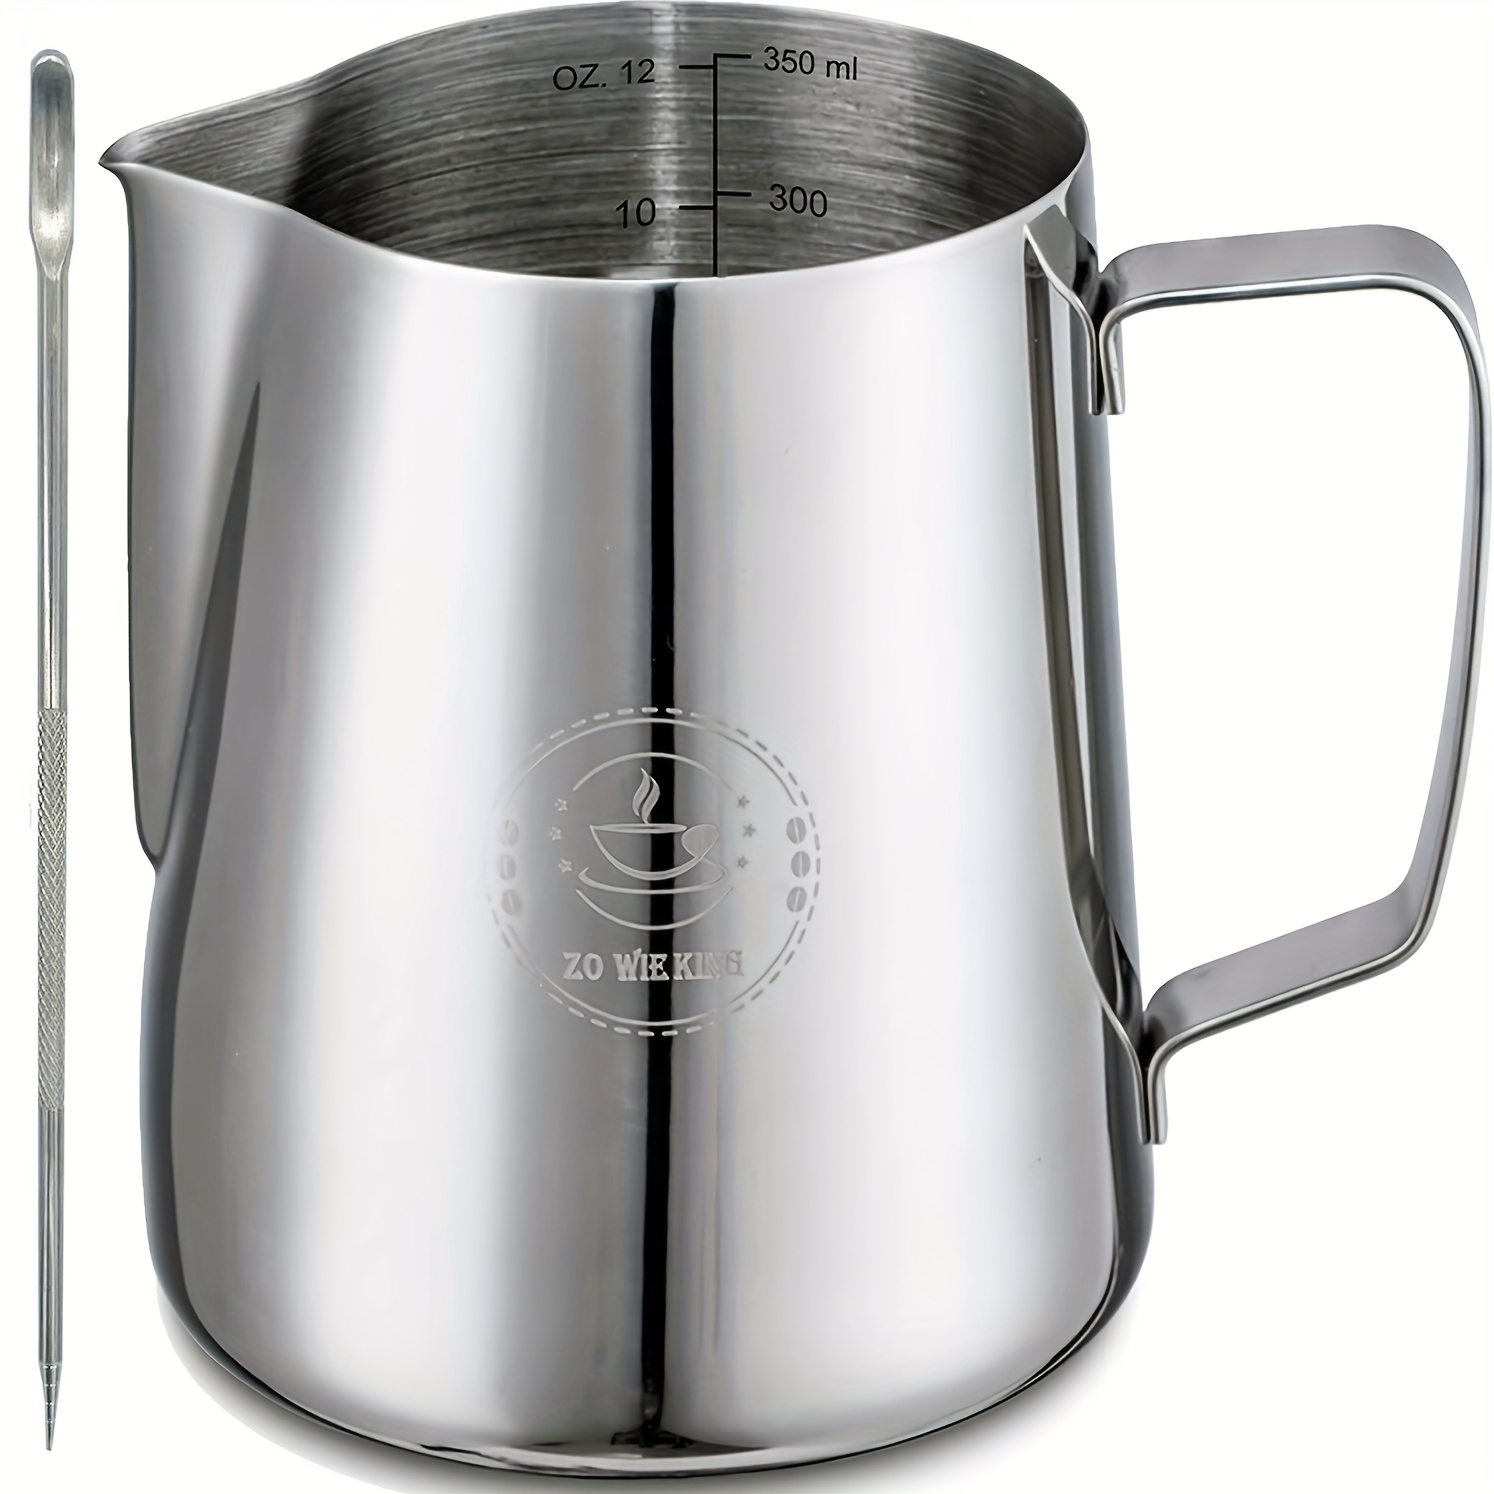 Williams Sonoma Coffee Milk Frothing Pitcher